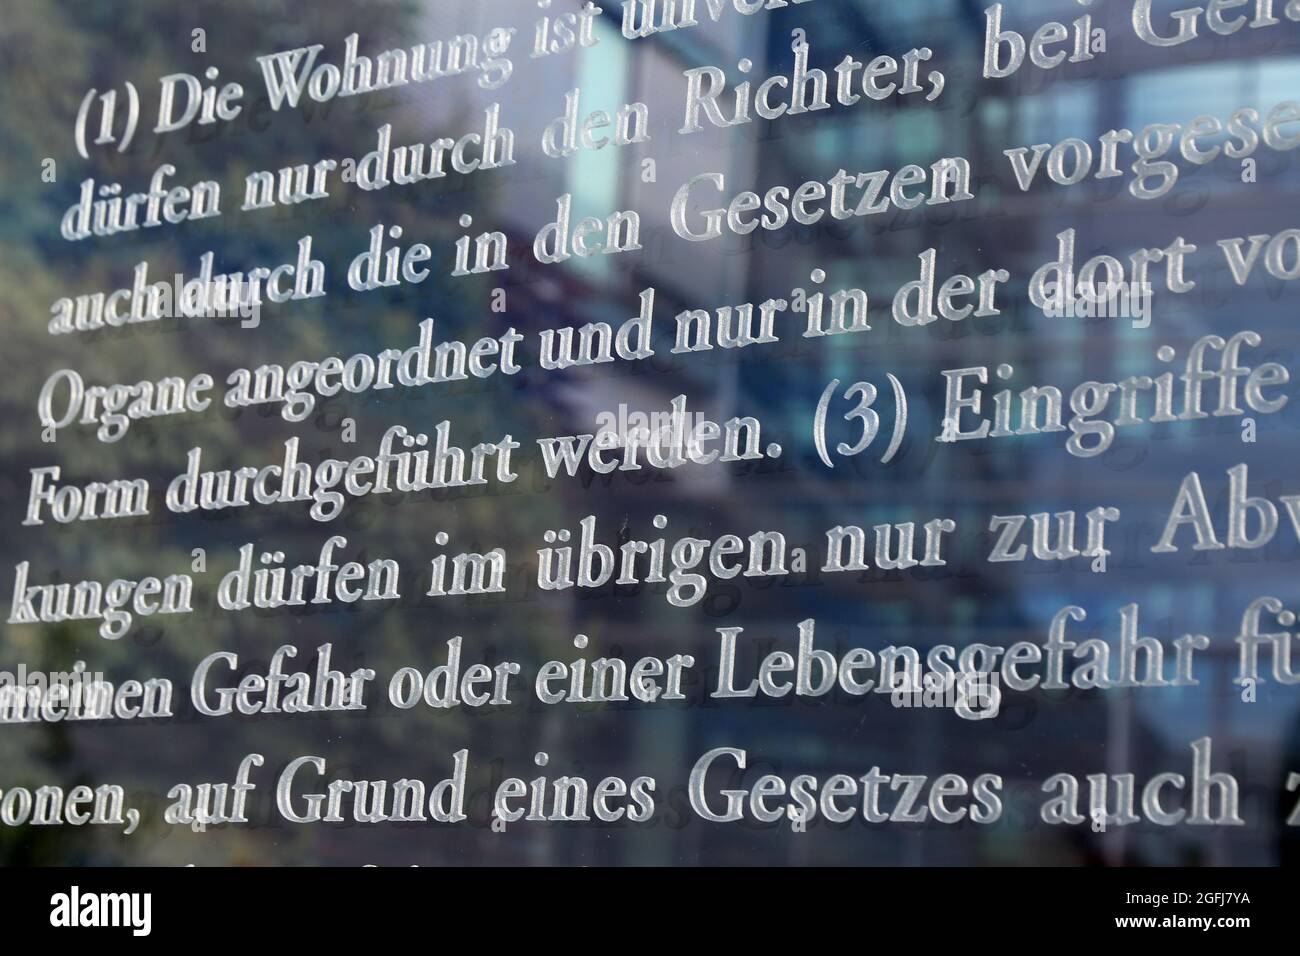 German Basic Law Article 13,Inviolability of the home (Unverletzlichkeit der Wohnung) , photographed on the glass panes at Jakob-Kaiser-Haus in Berlin Stock Photo